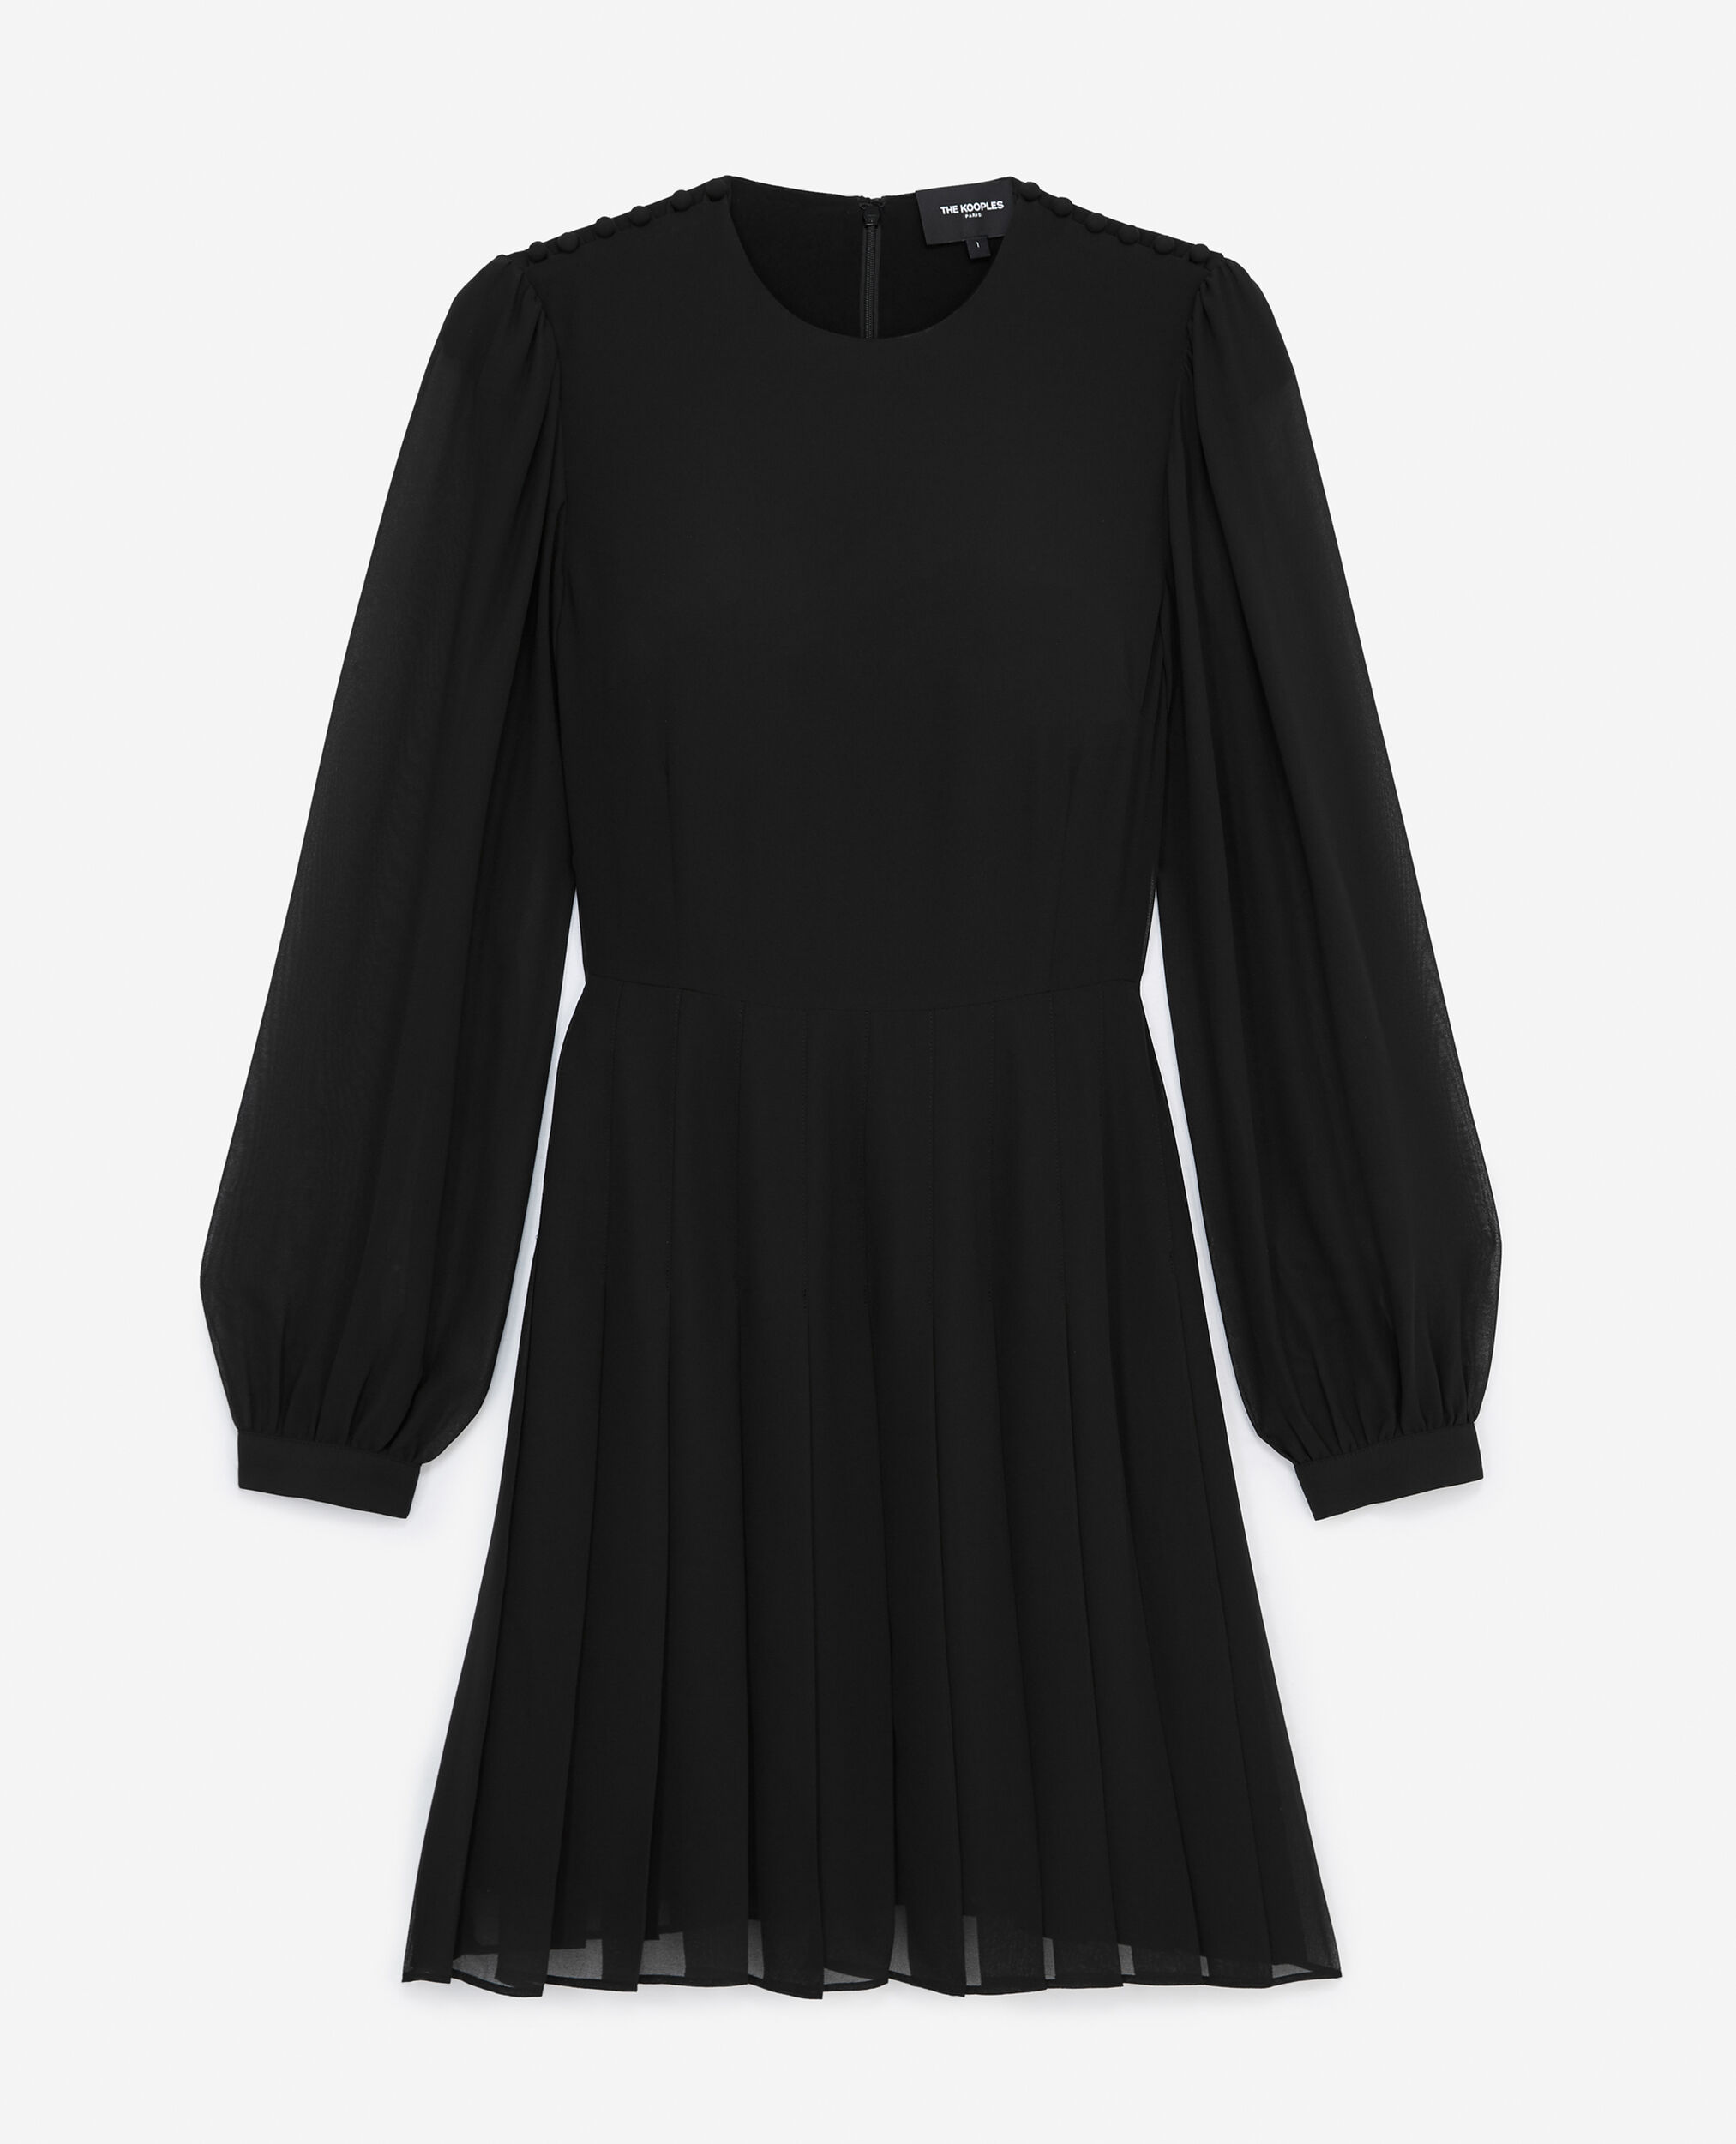 Pleated short black dress with shoulder buttons | The Kooples - UK